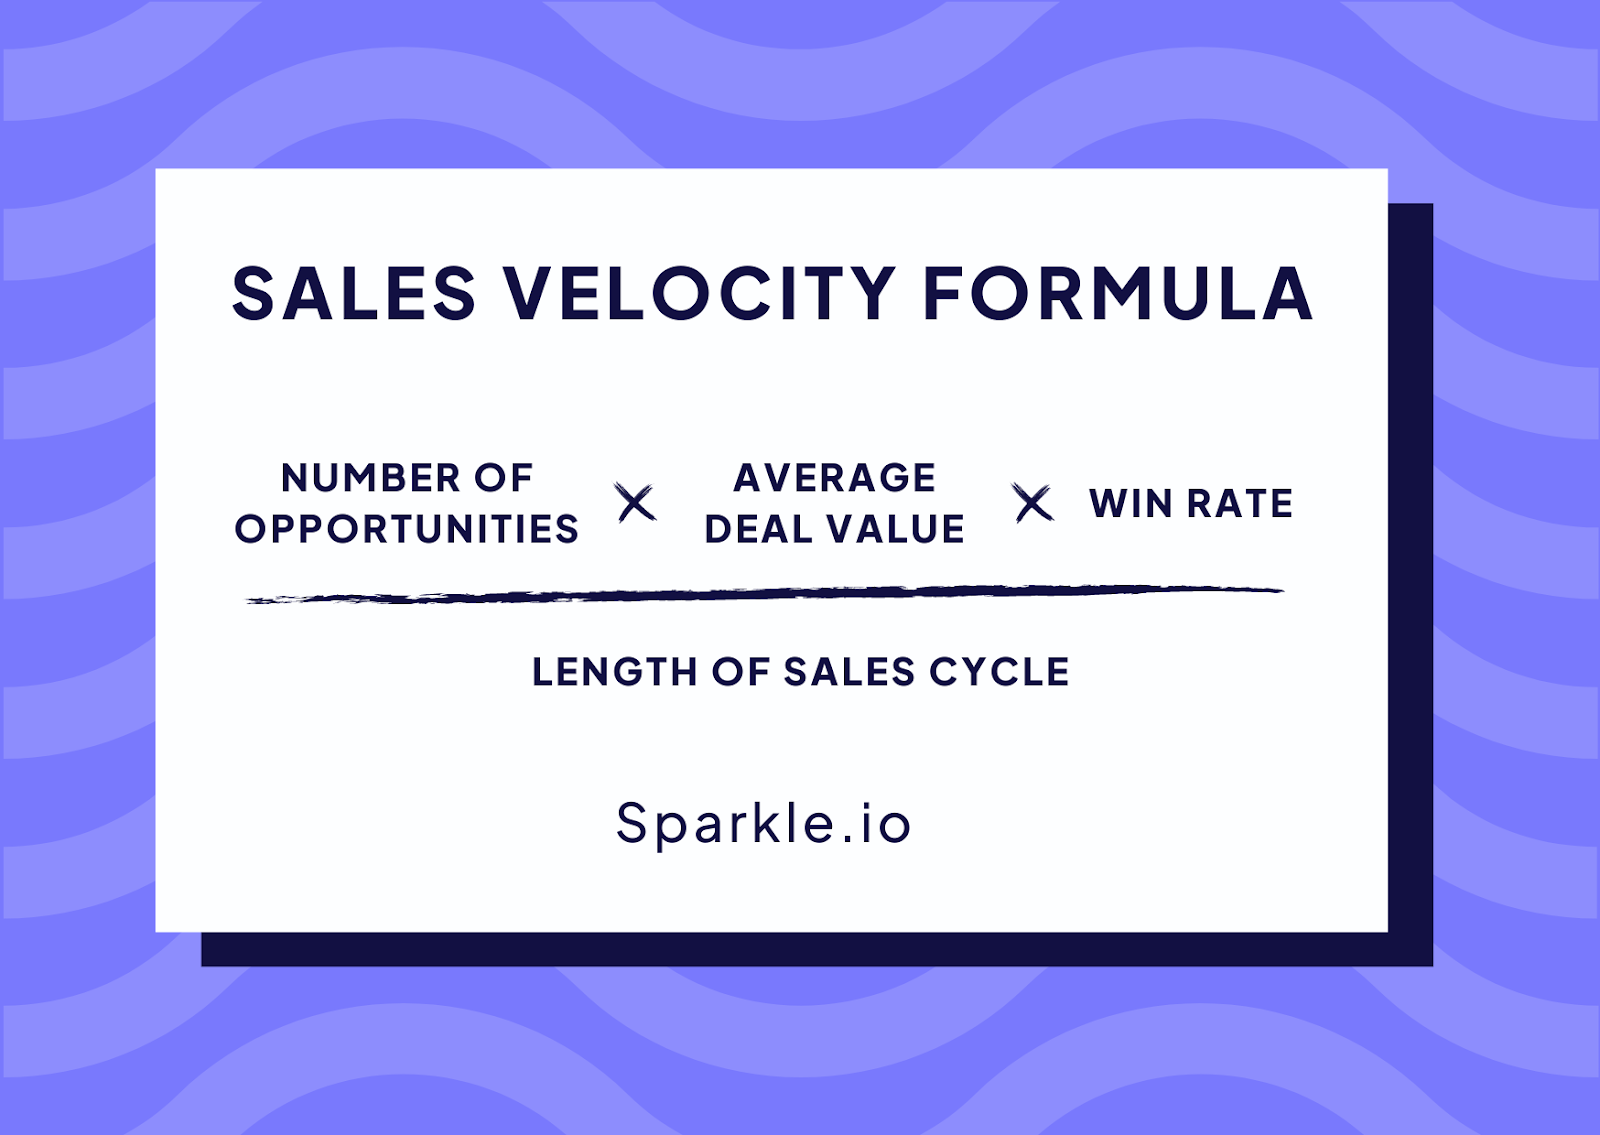 Sales Velocity = Number of Opportunities * Average Deal Value * Win Rate / Length of Sales Cycle